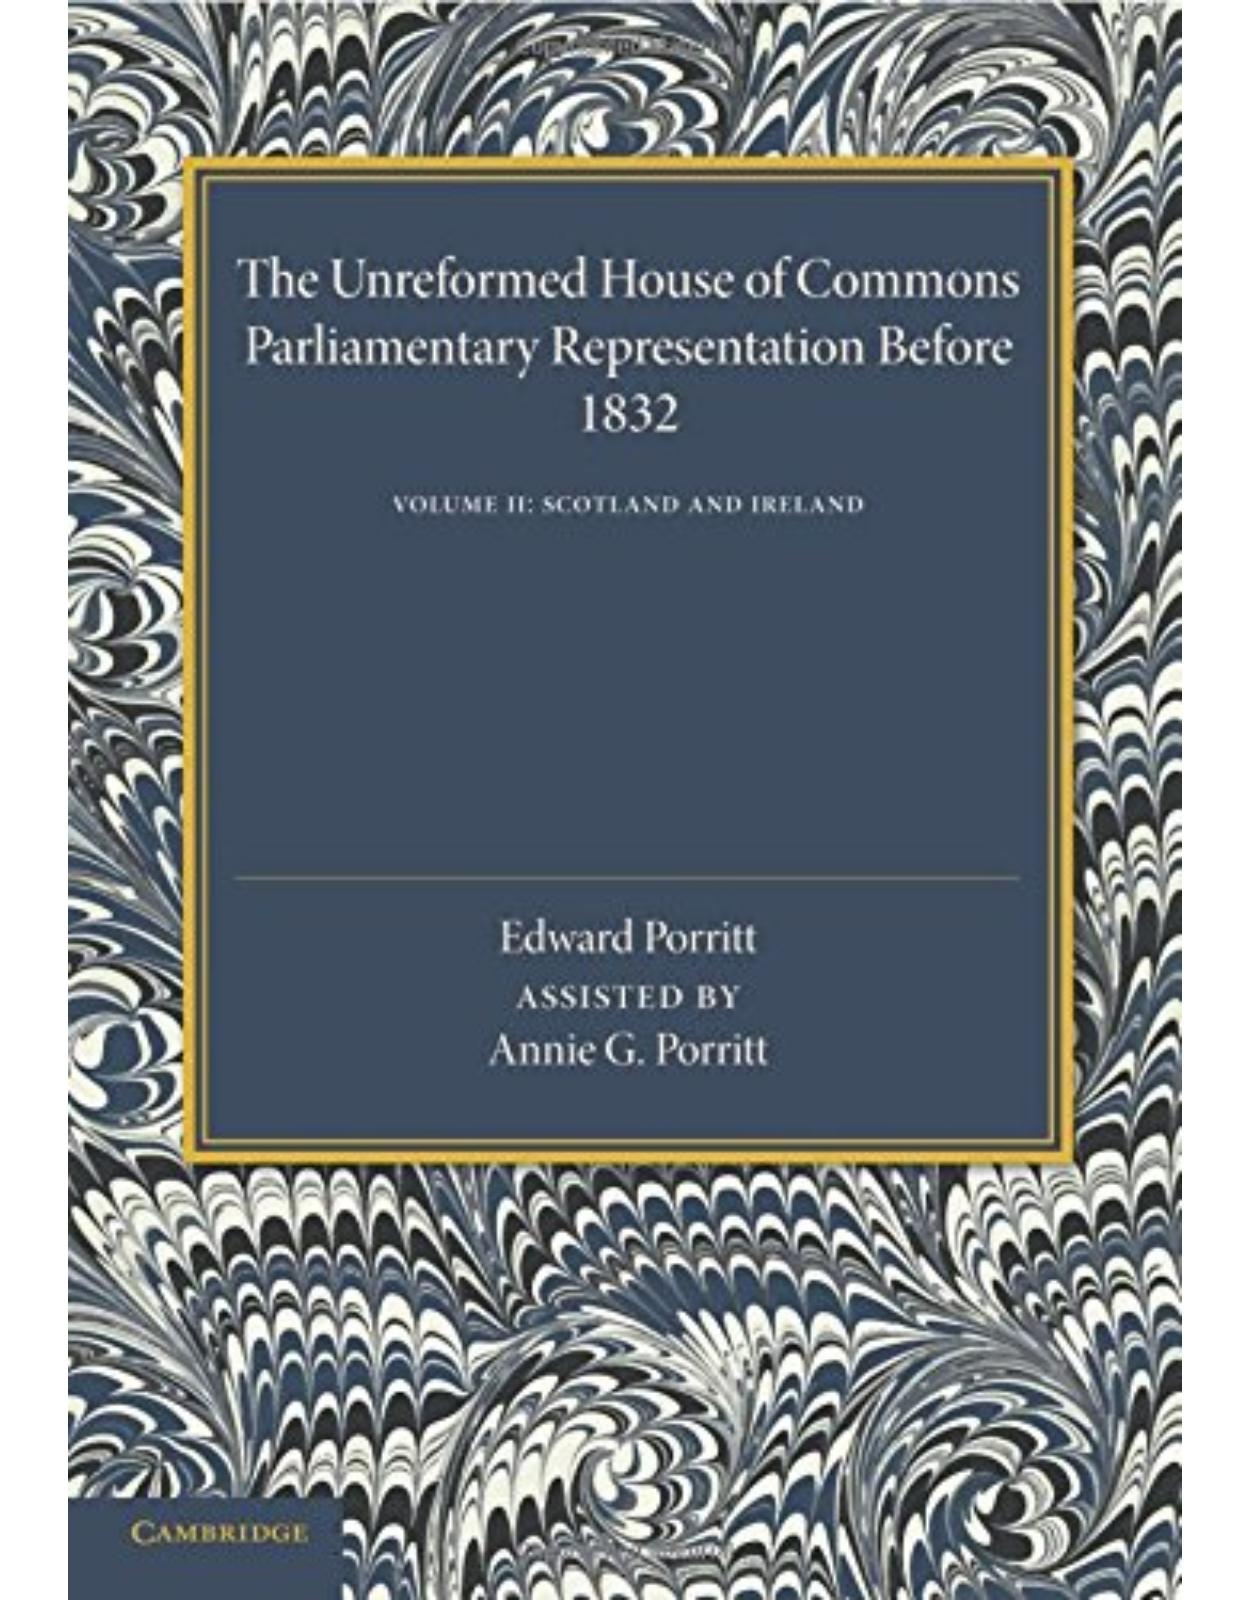 The Unreformed House of Commons: Volume 2, Scotland and Ireland: Parliamentary Representation Before 1831